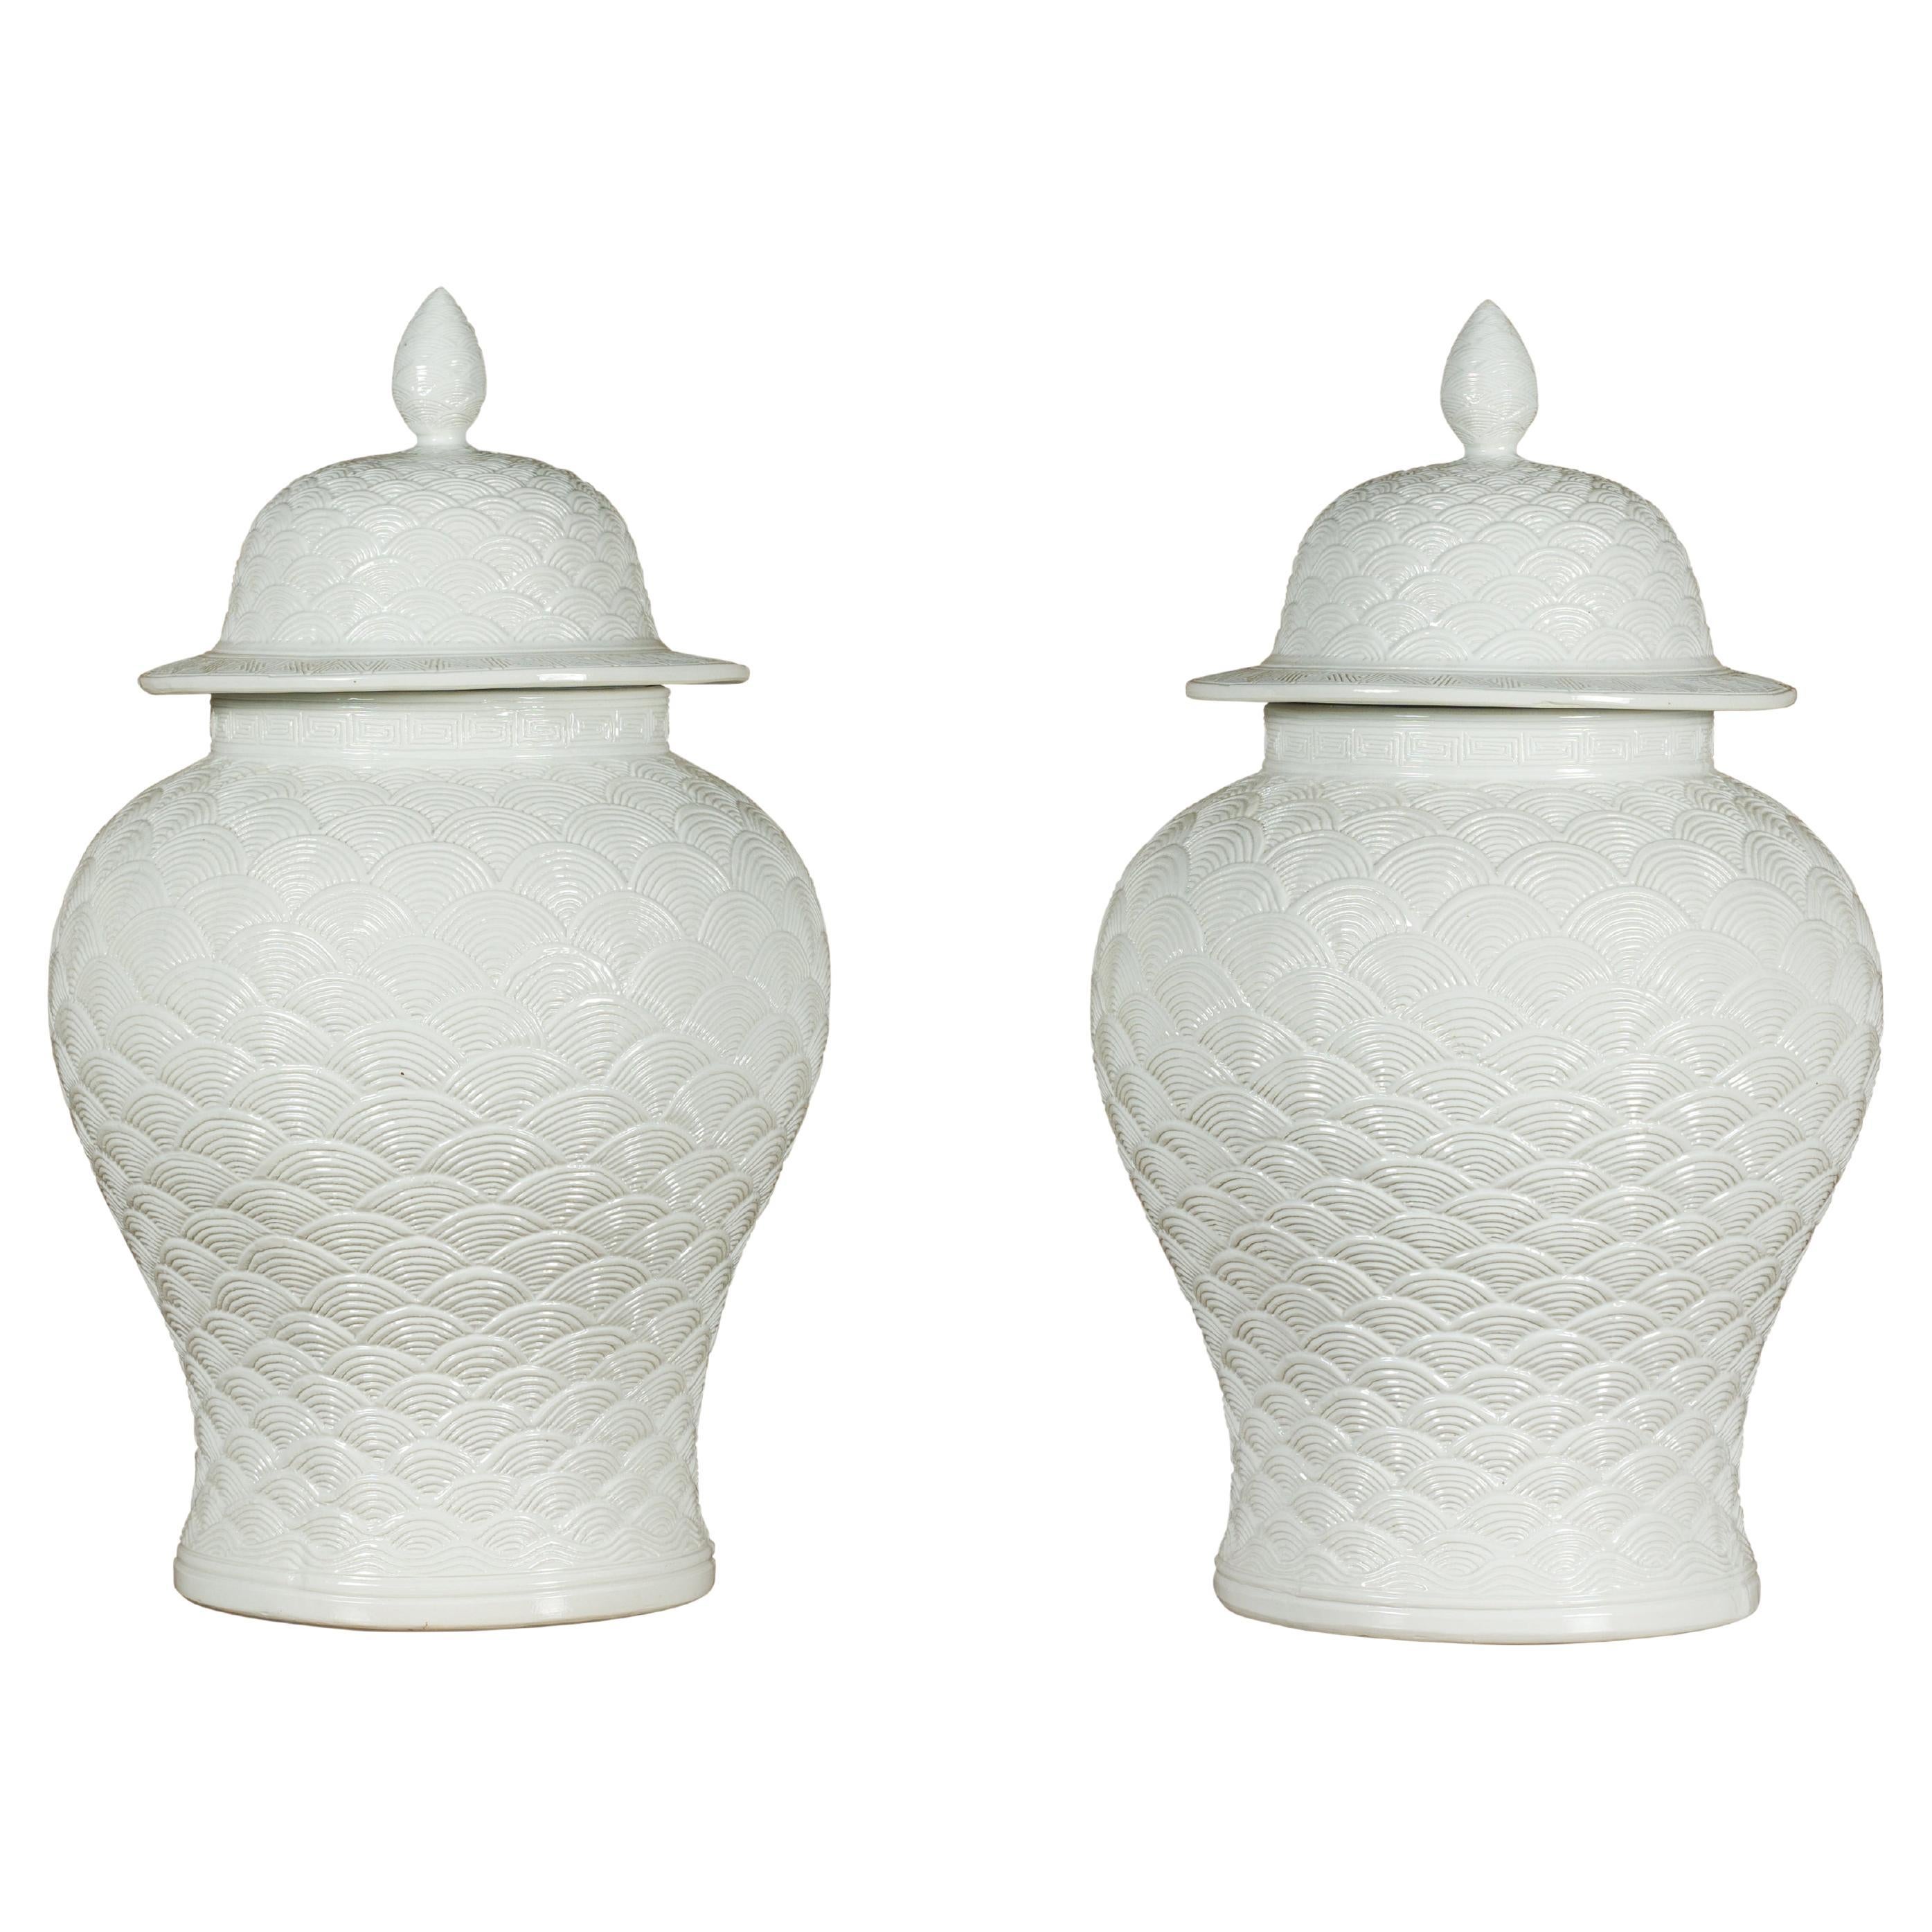 Pair of White Porcelain Fish Scale Lidded Jars with Petite Finials For Sale